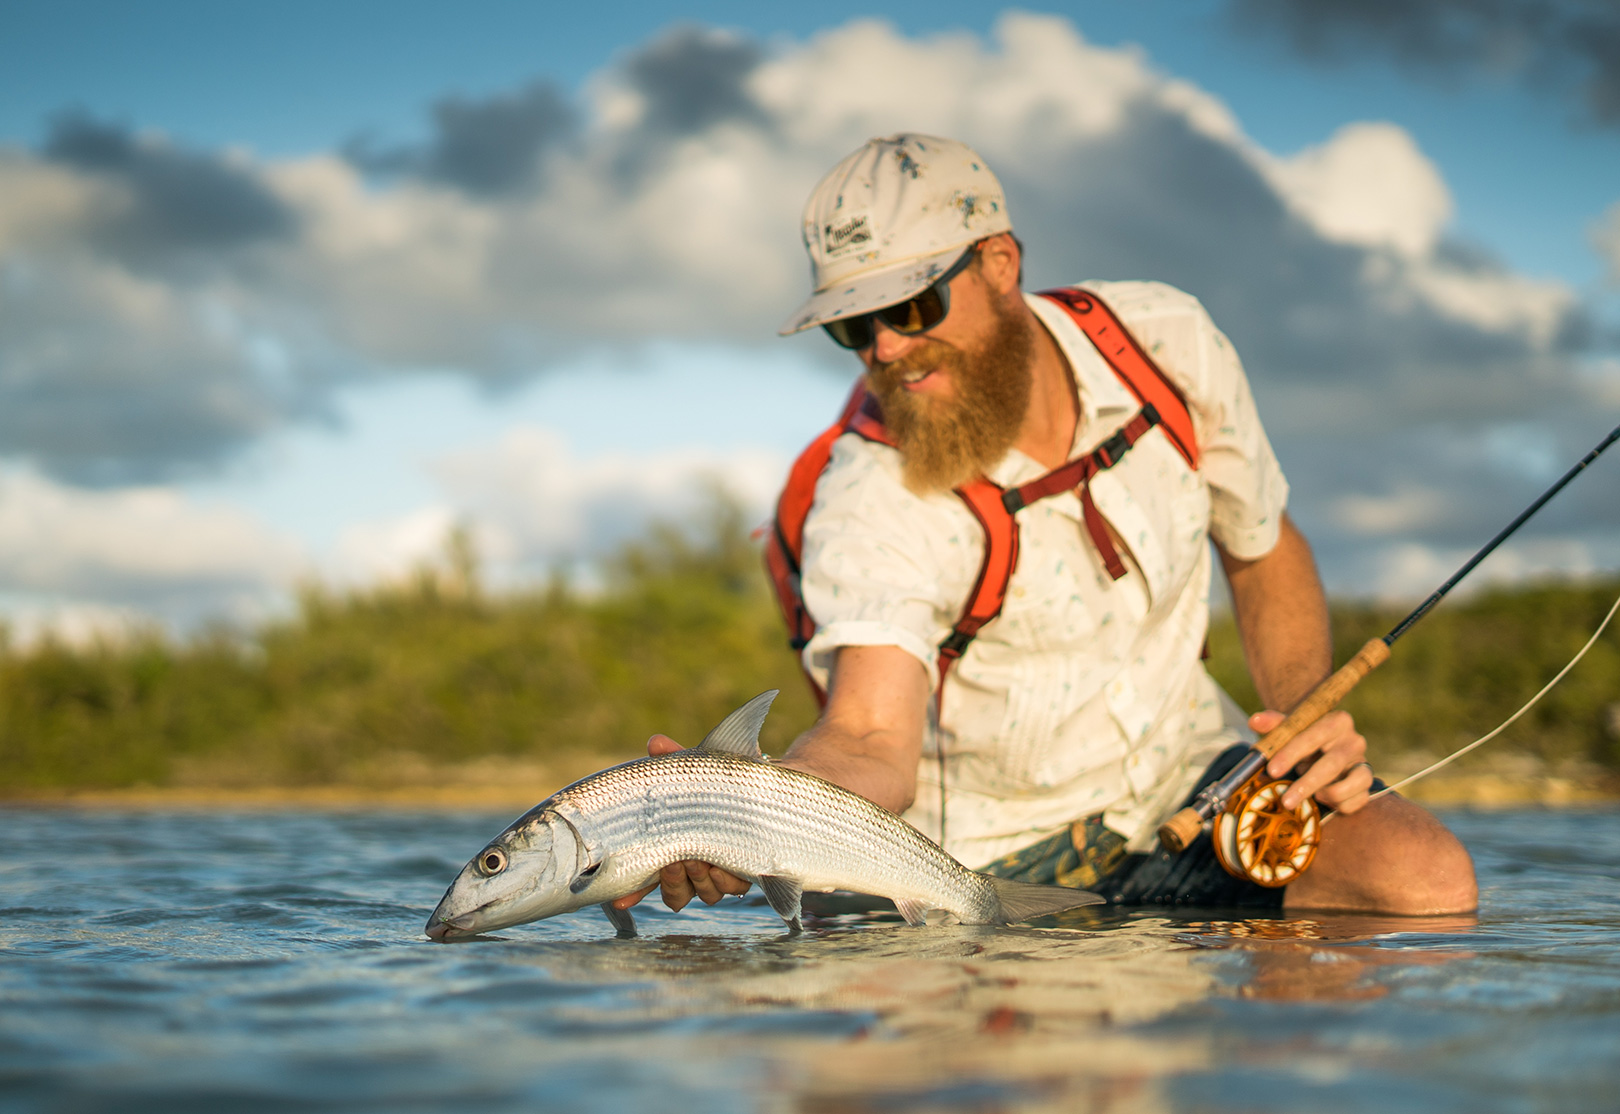 The Best Fishing in The Bahamas